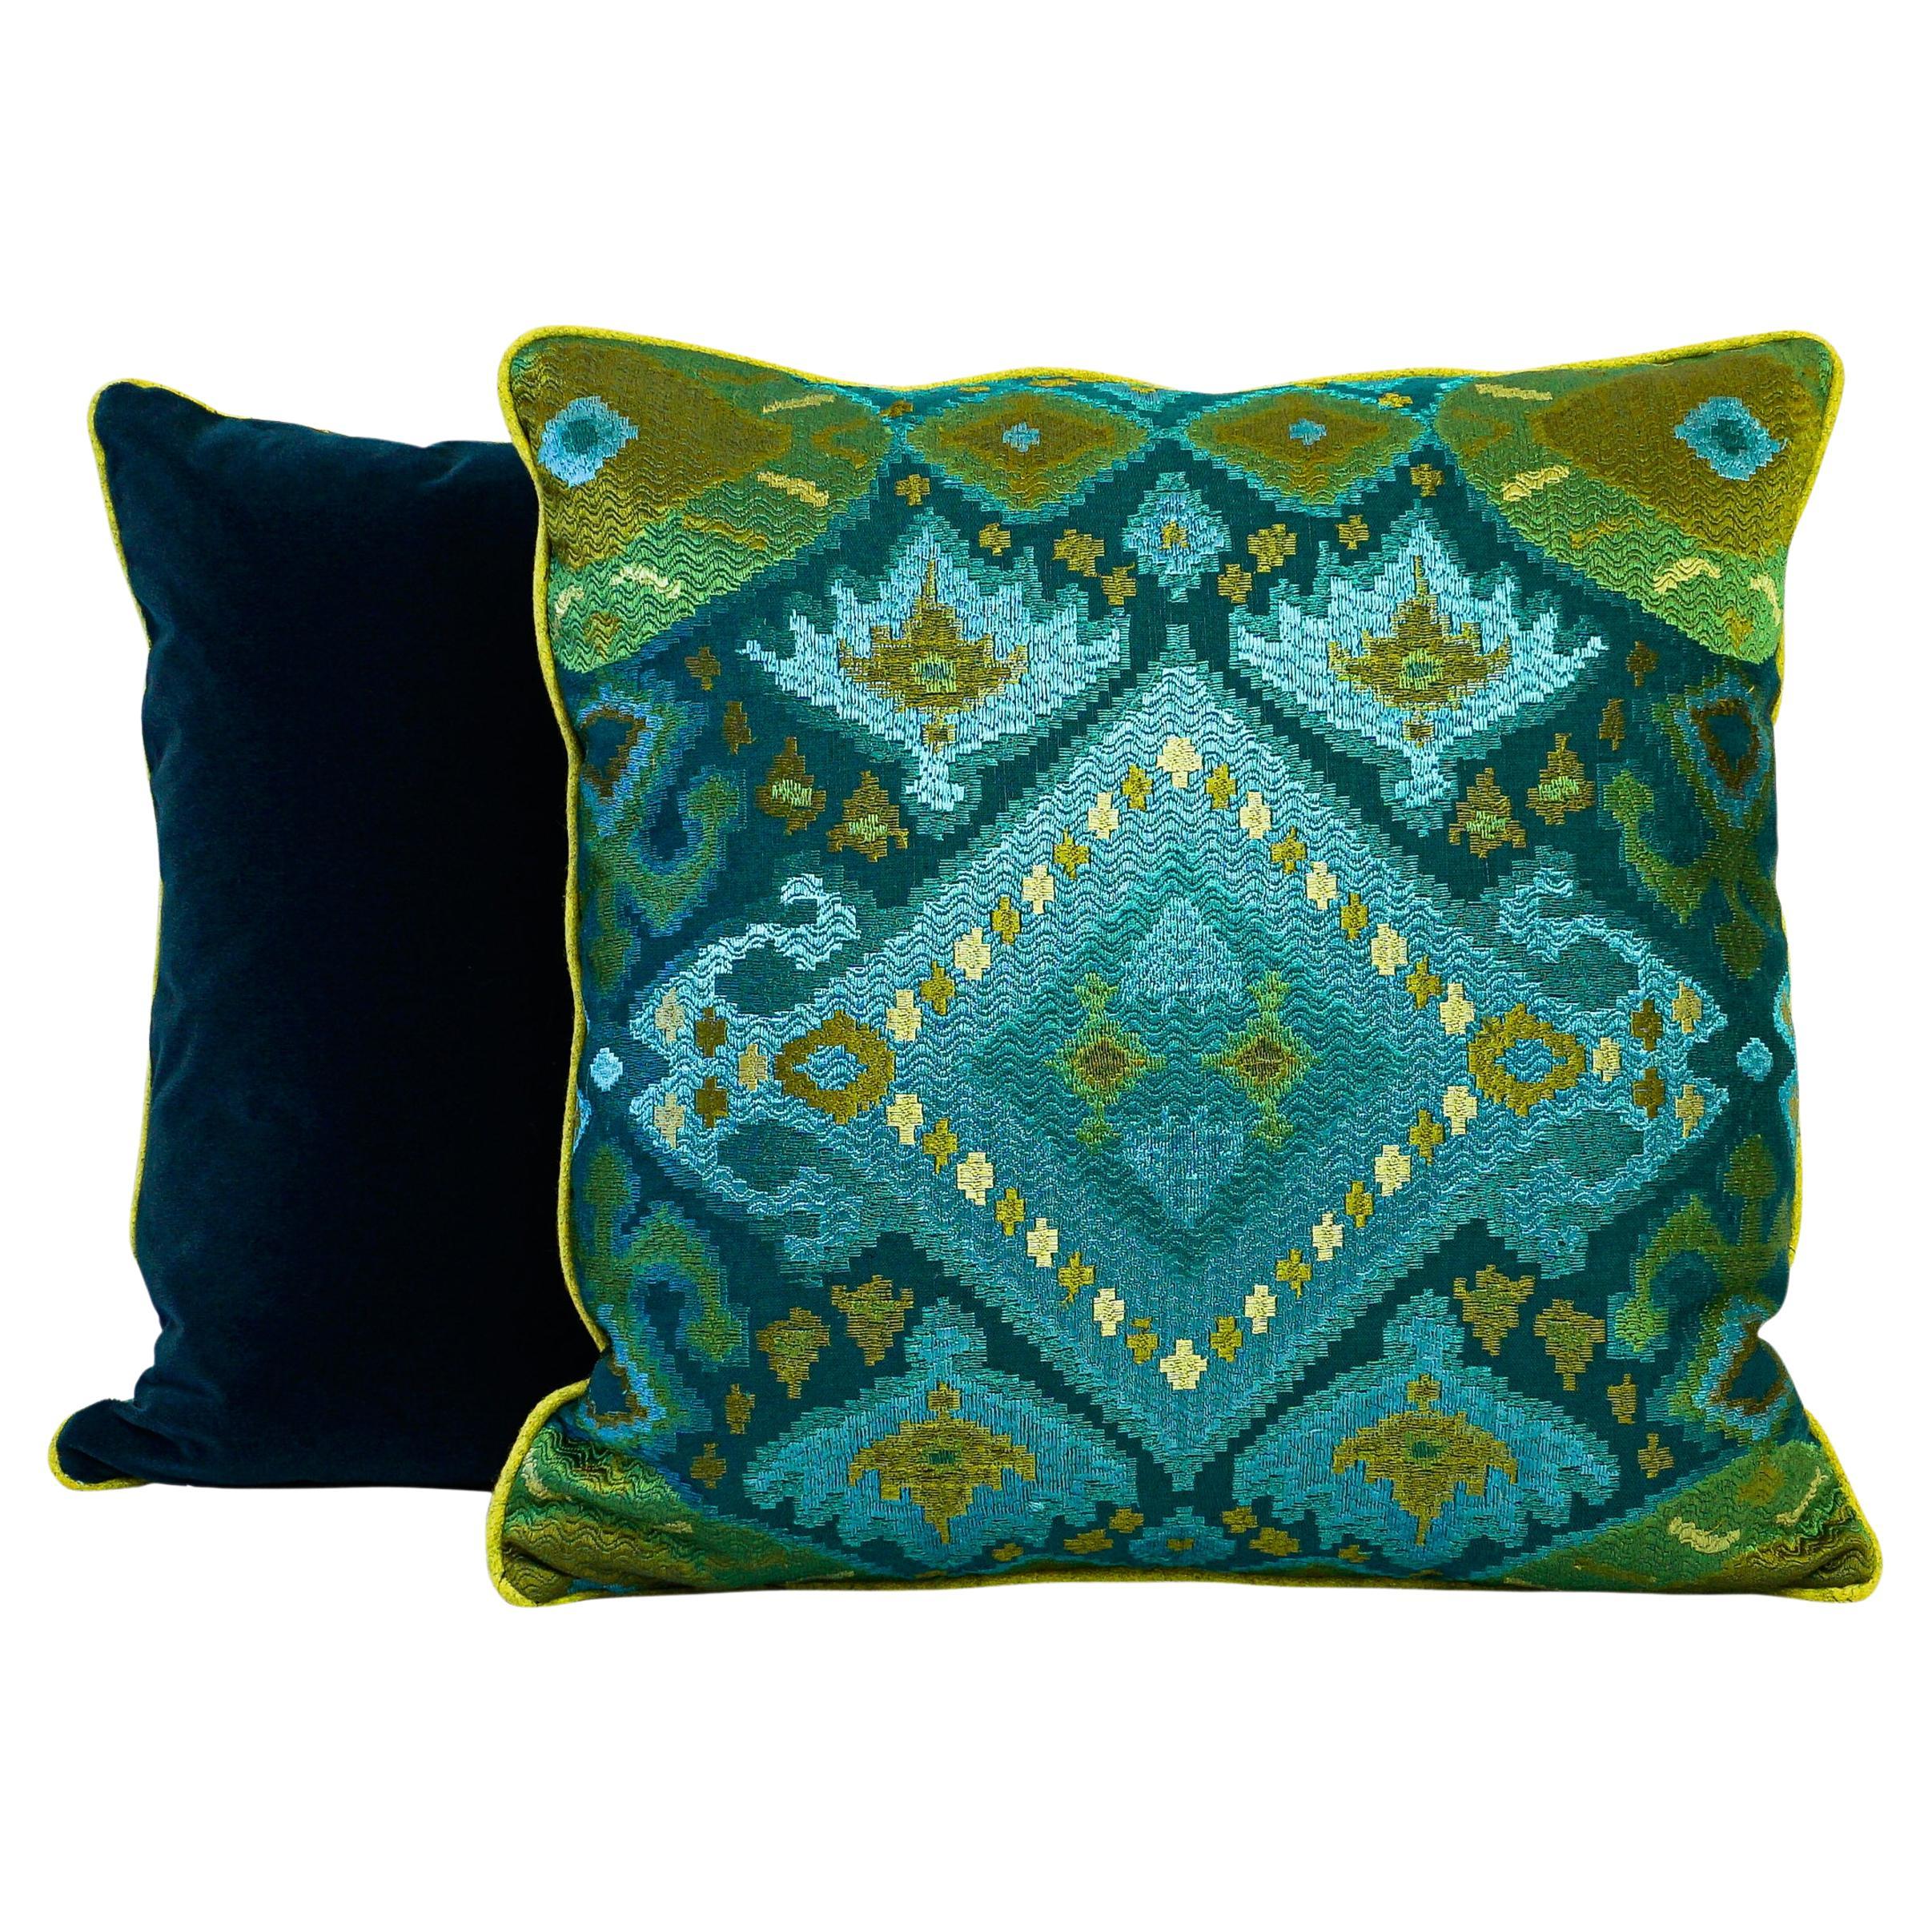 Peacock Color Ikat Inspired Throw Pillows For Sale